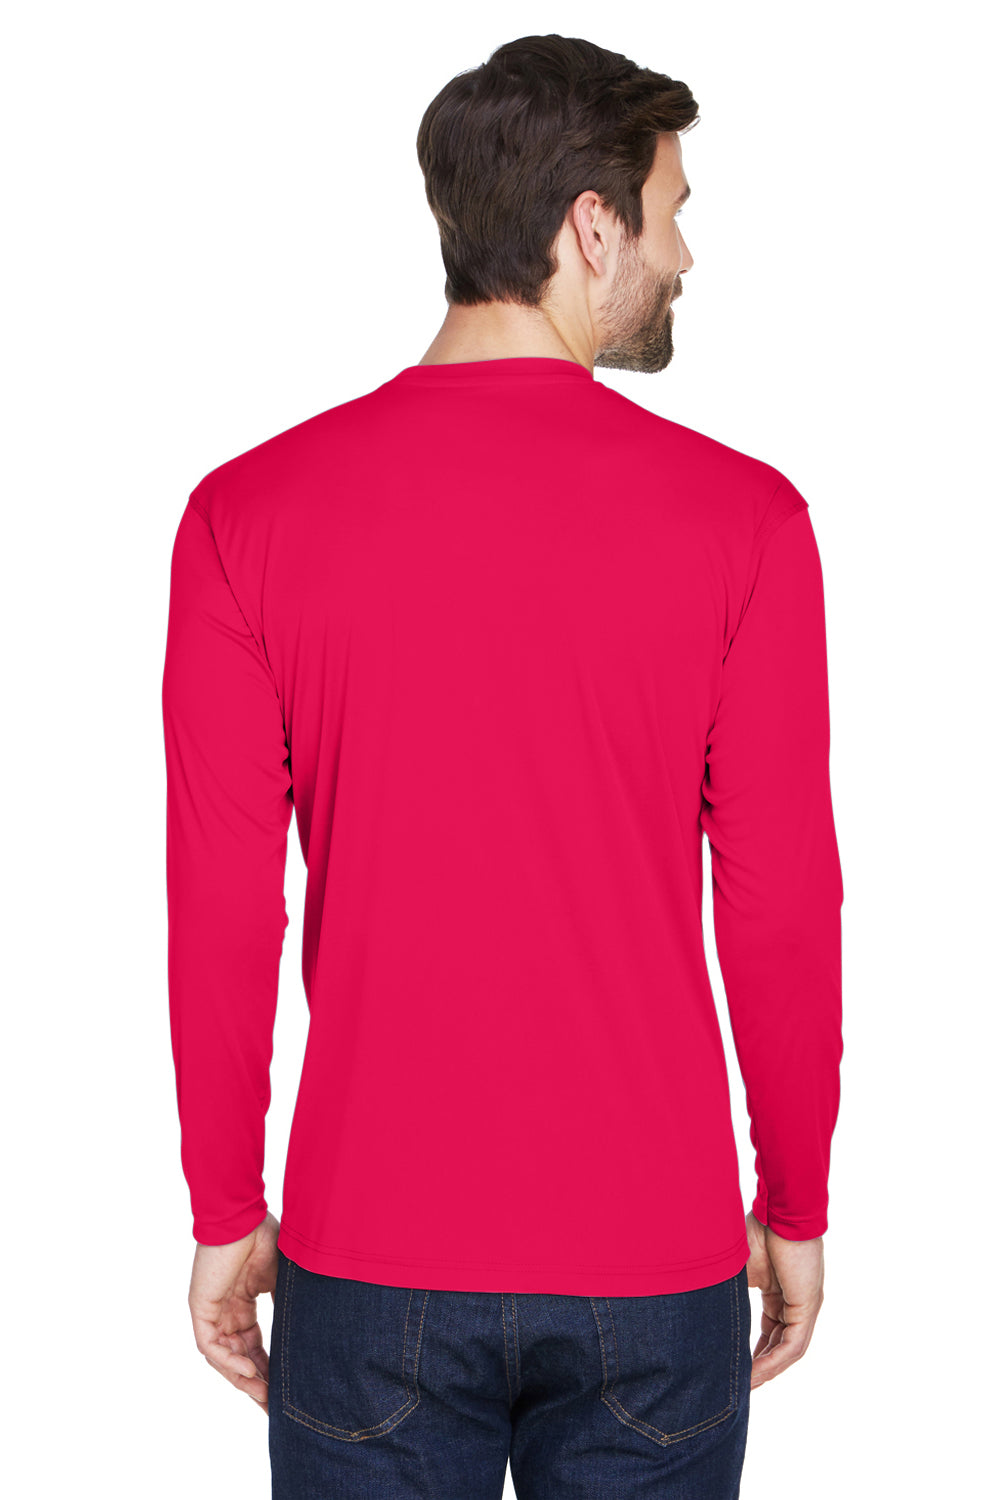 UltraClub 8422 Mens Cool & Dry Performance Moisture Wicking Long Sleeve Crewneck T-Shirt Red Back